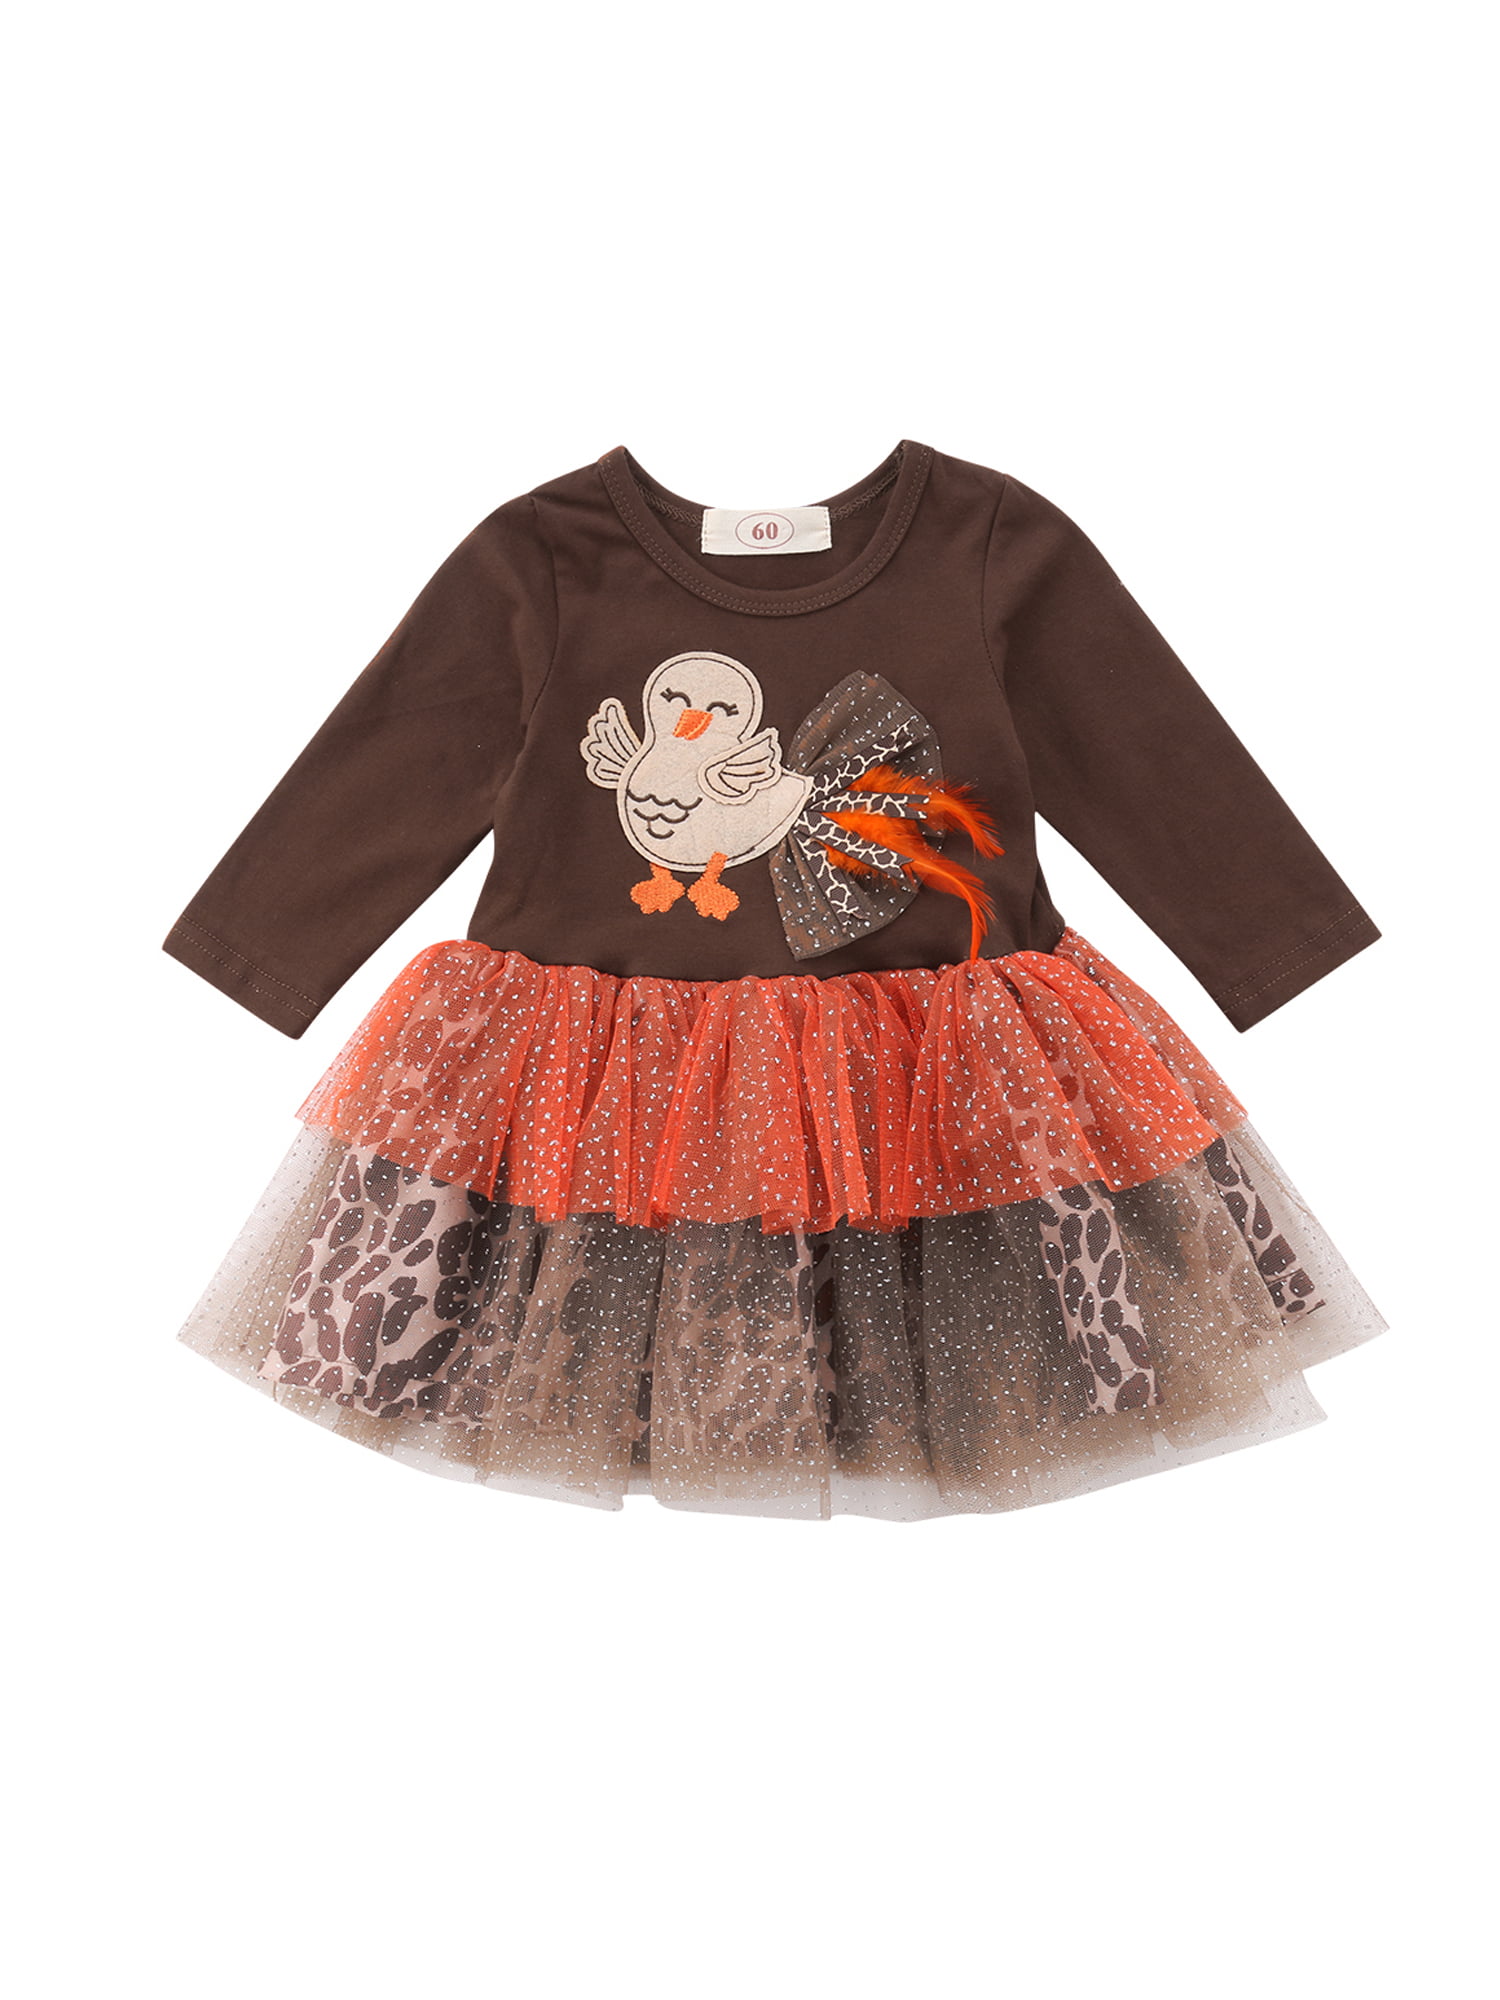 newborn baby girl thanksgiving outfits